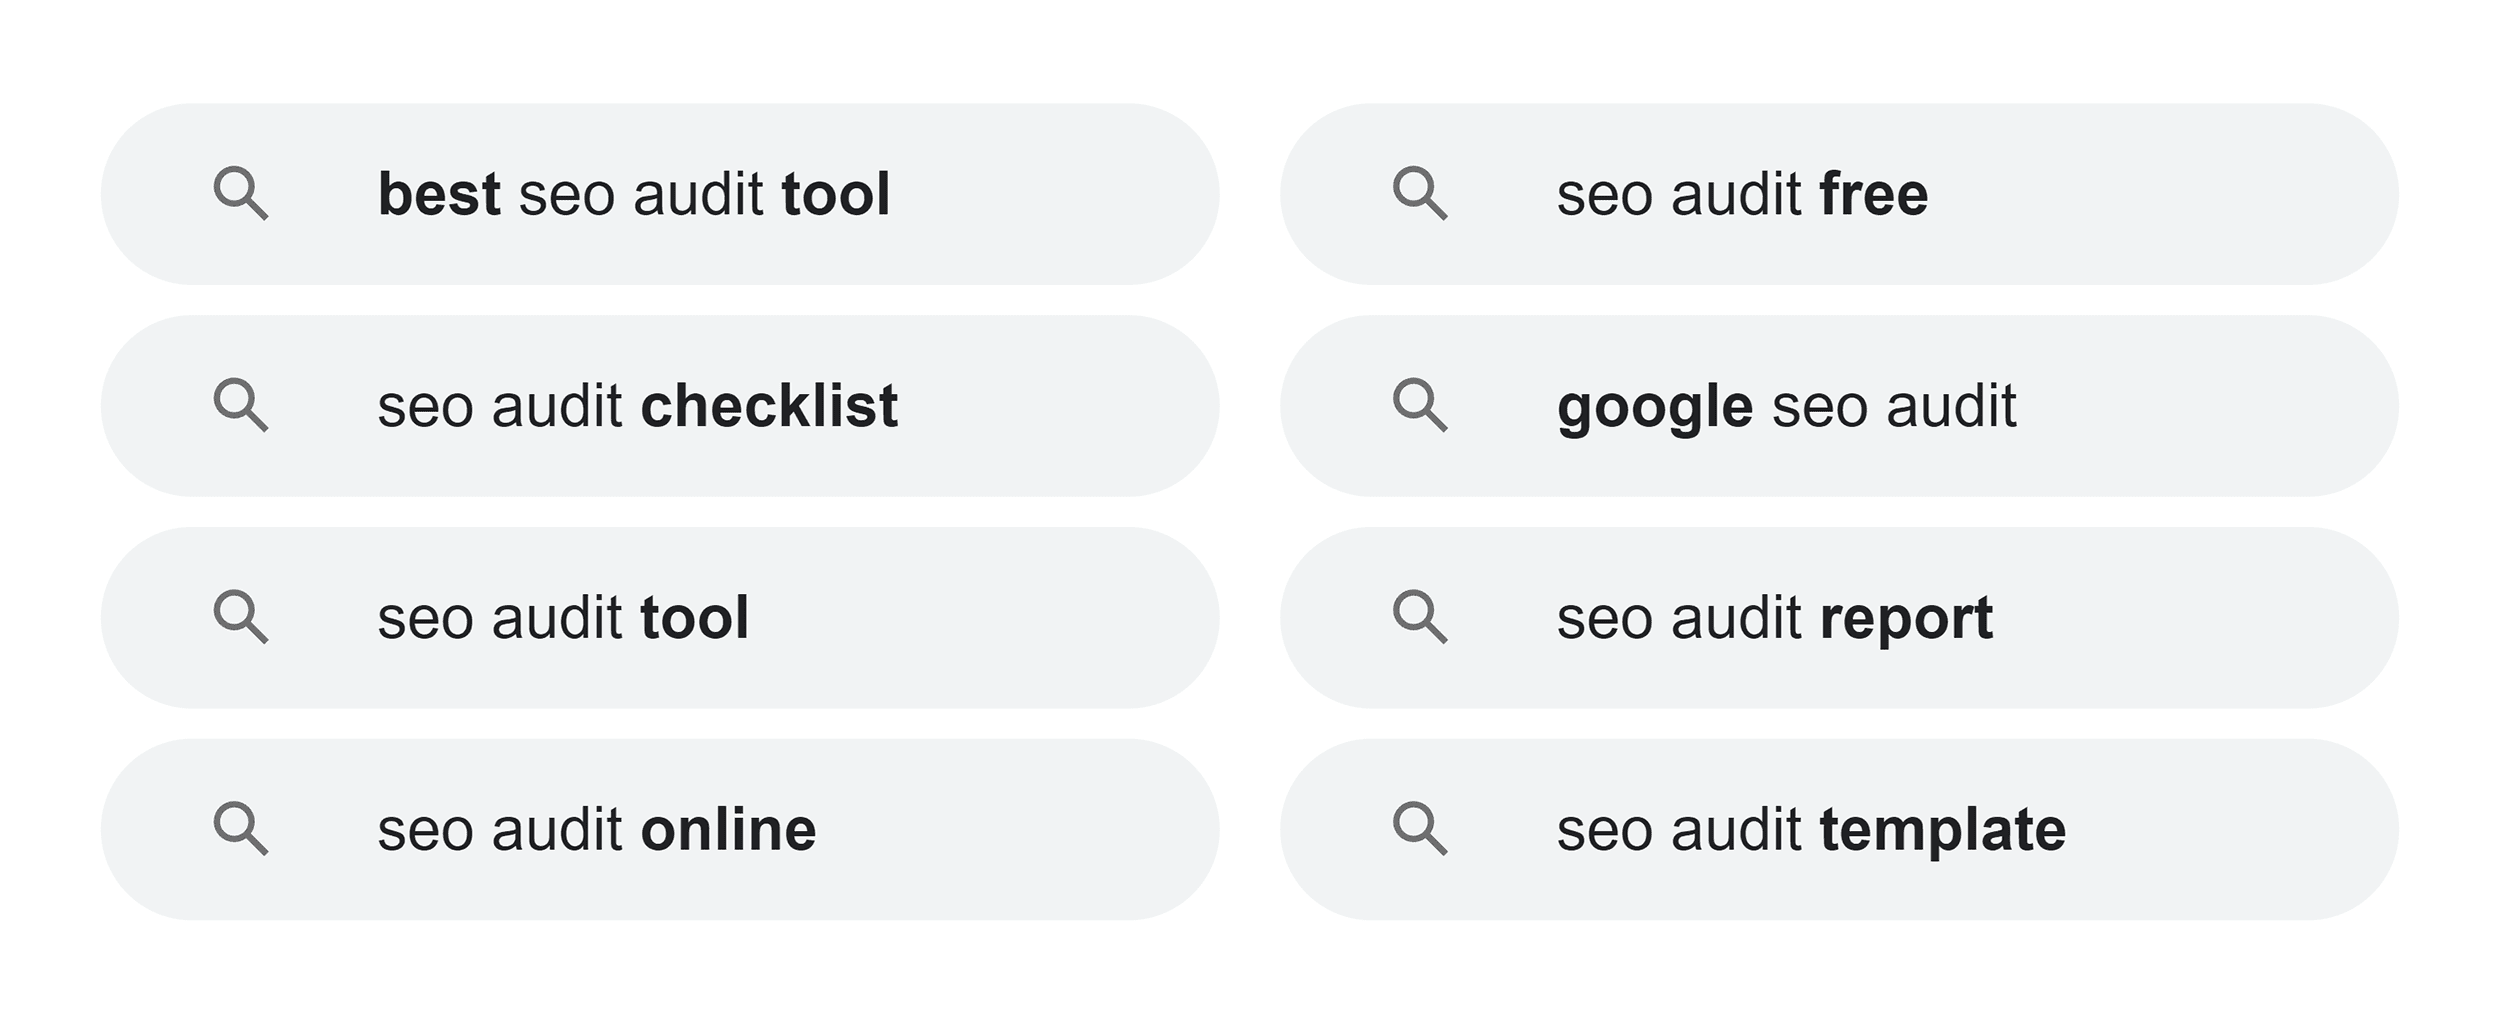 seo-audit-searches-related-to